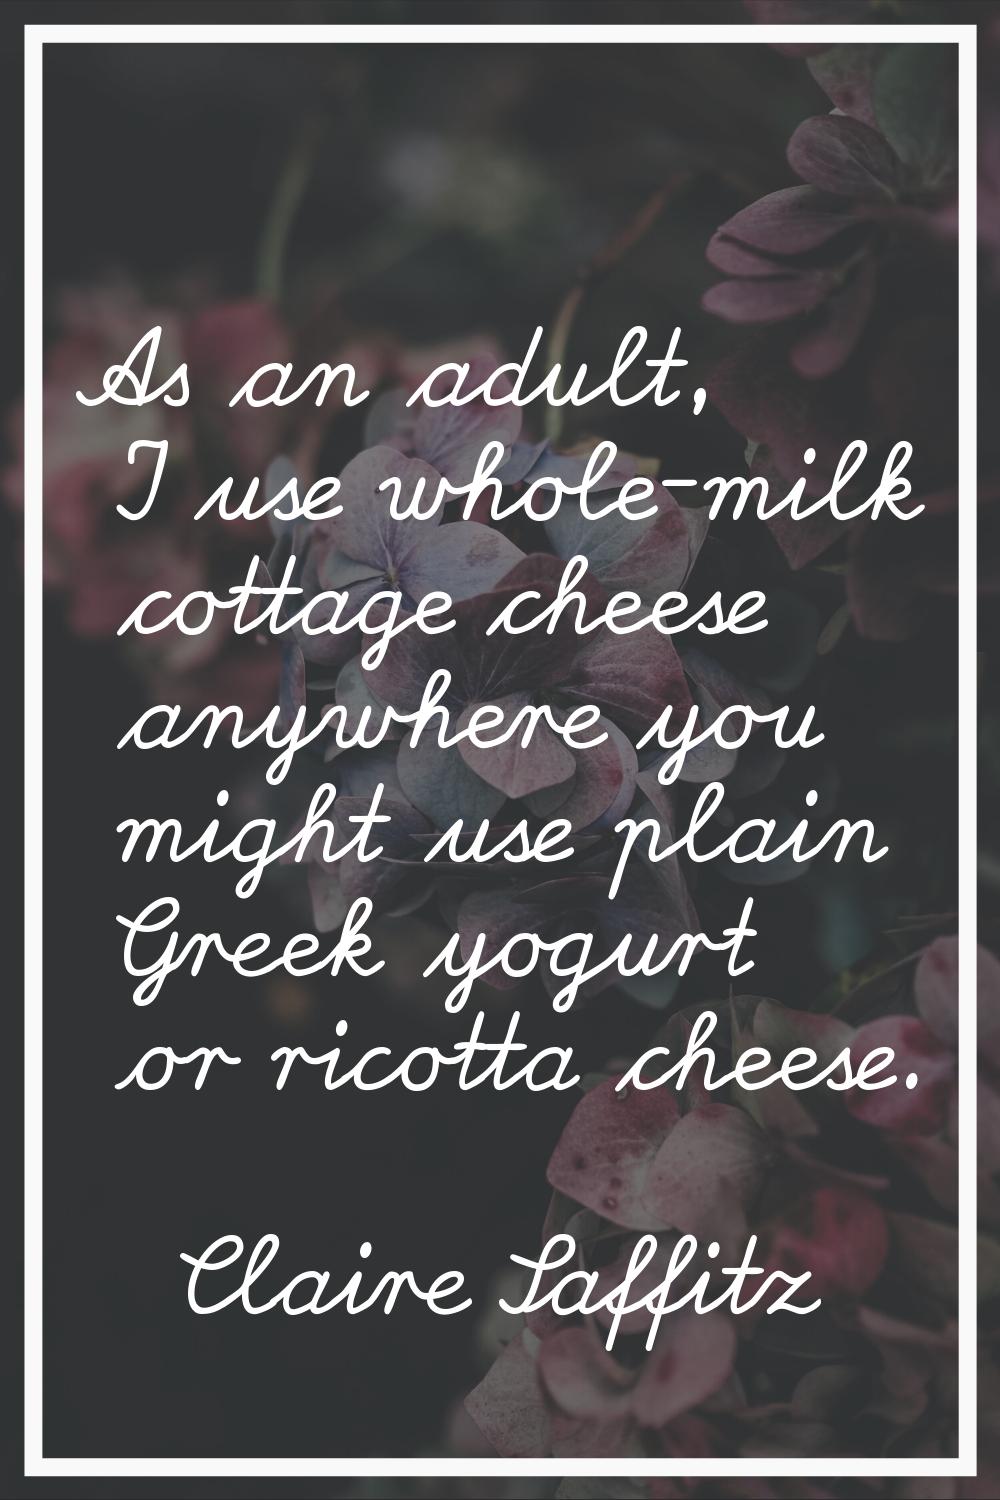 As an adult, I use whole-milk cottage cheese anywhere you might use plain Greek yogurt or ricotta c